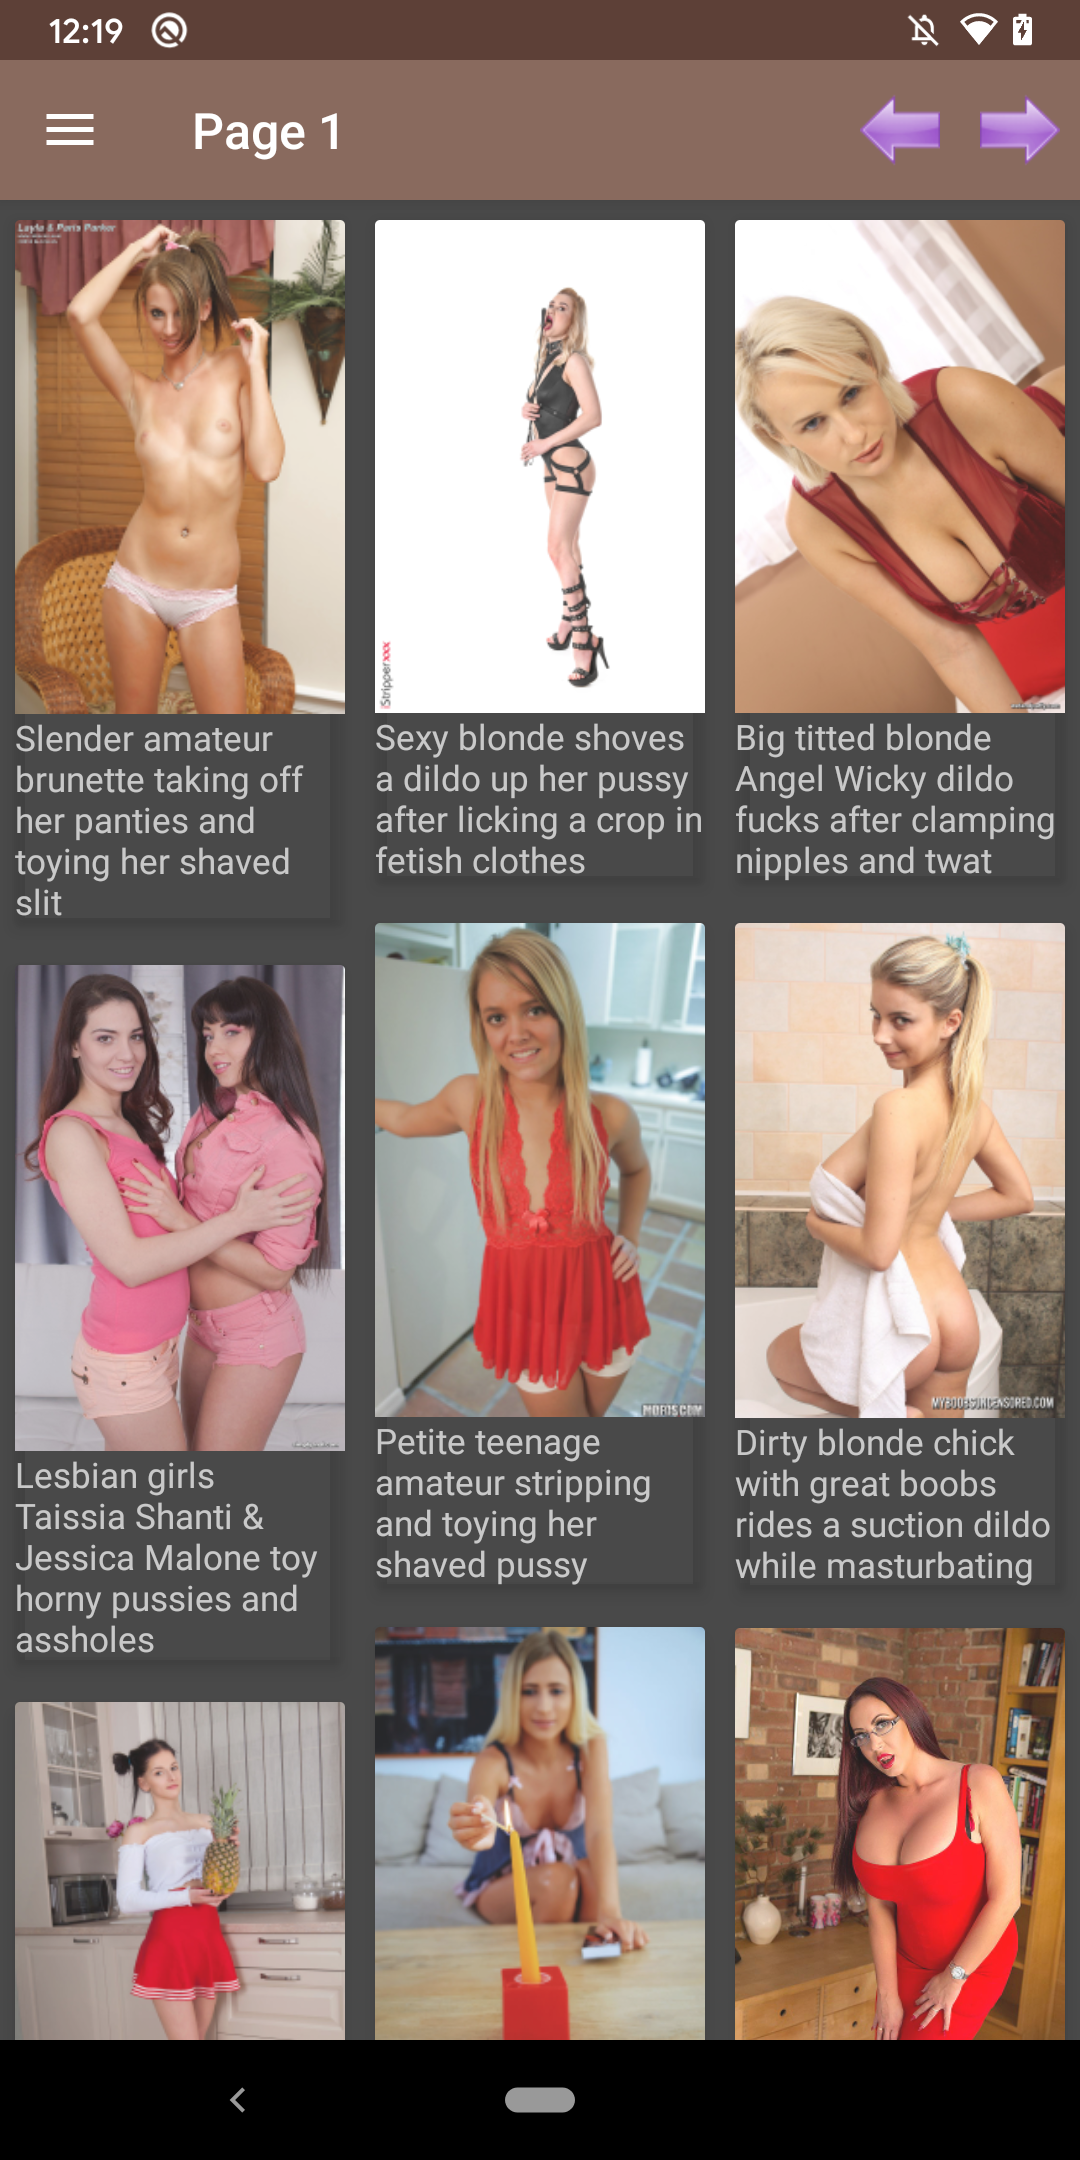 Dildo Galleries dicks,futanari,sexy,photos,chicks,mobile,comics,galleries,for,apps,pictires,hentai,android,star,images,viewer,with,henti,download,app,pornstars,collections,amateurs,dildo,porn,ann,pictures,lisa,apk,free